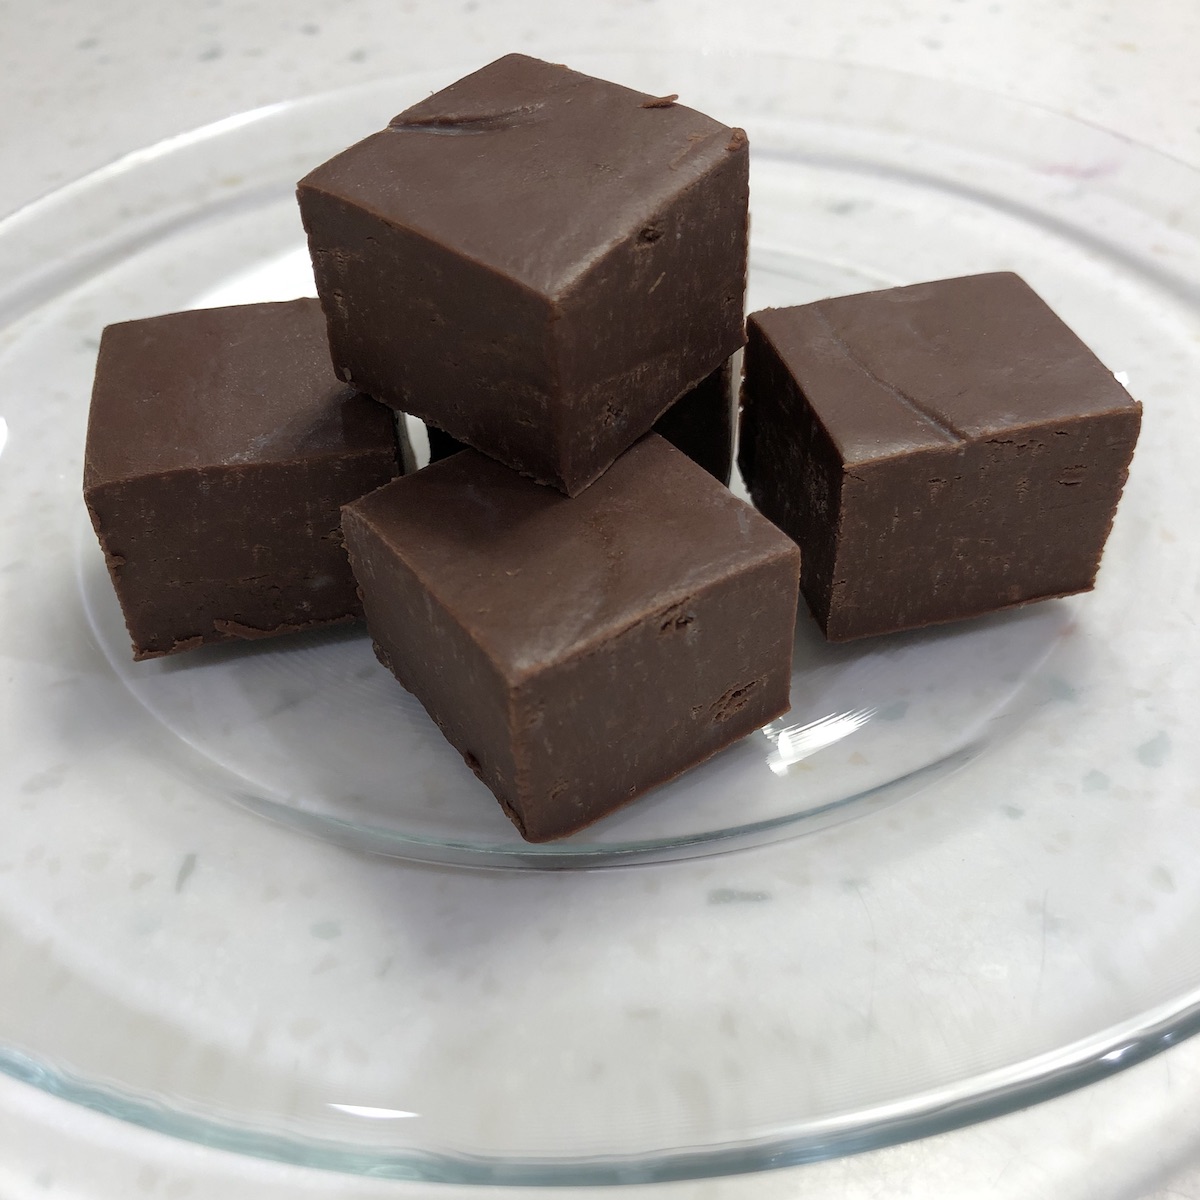 5 pieces fudge sitting on a glass plate on a white speckled counter